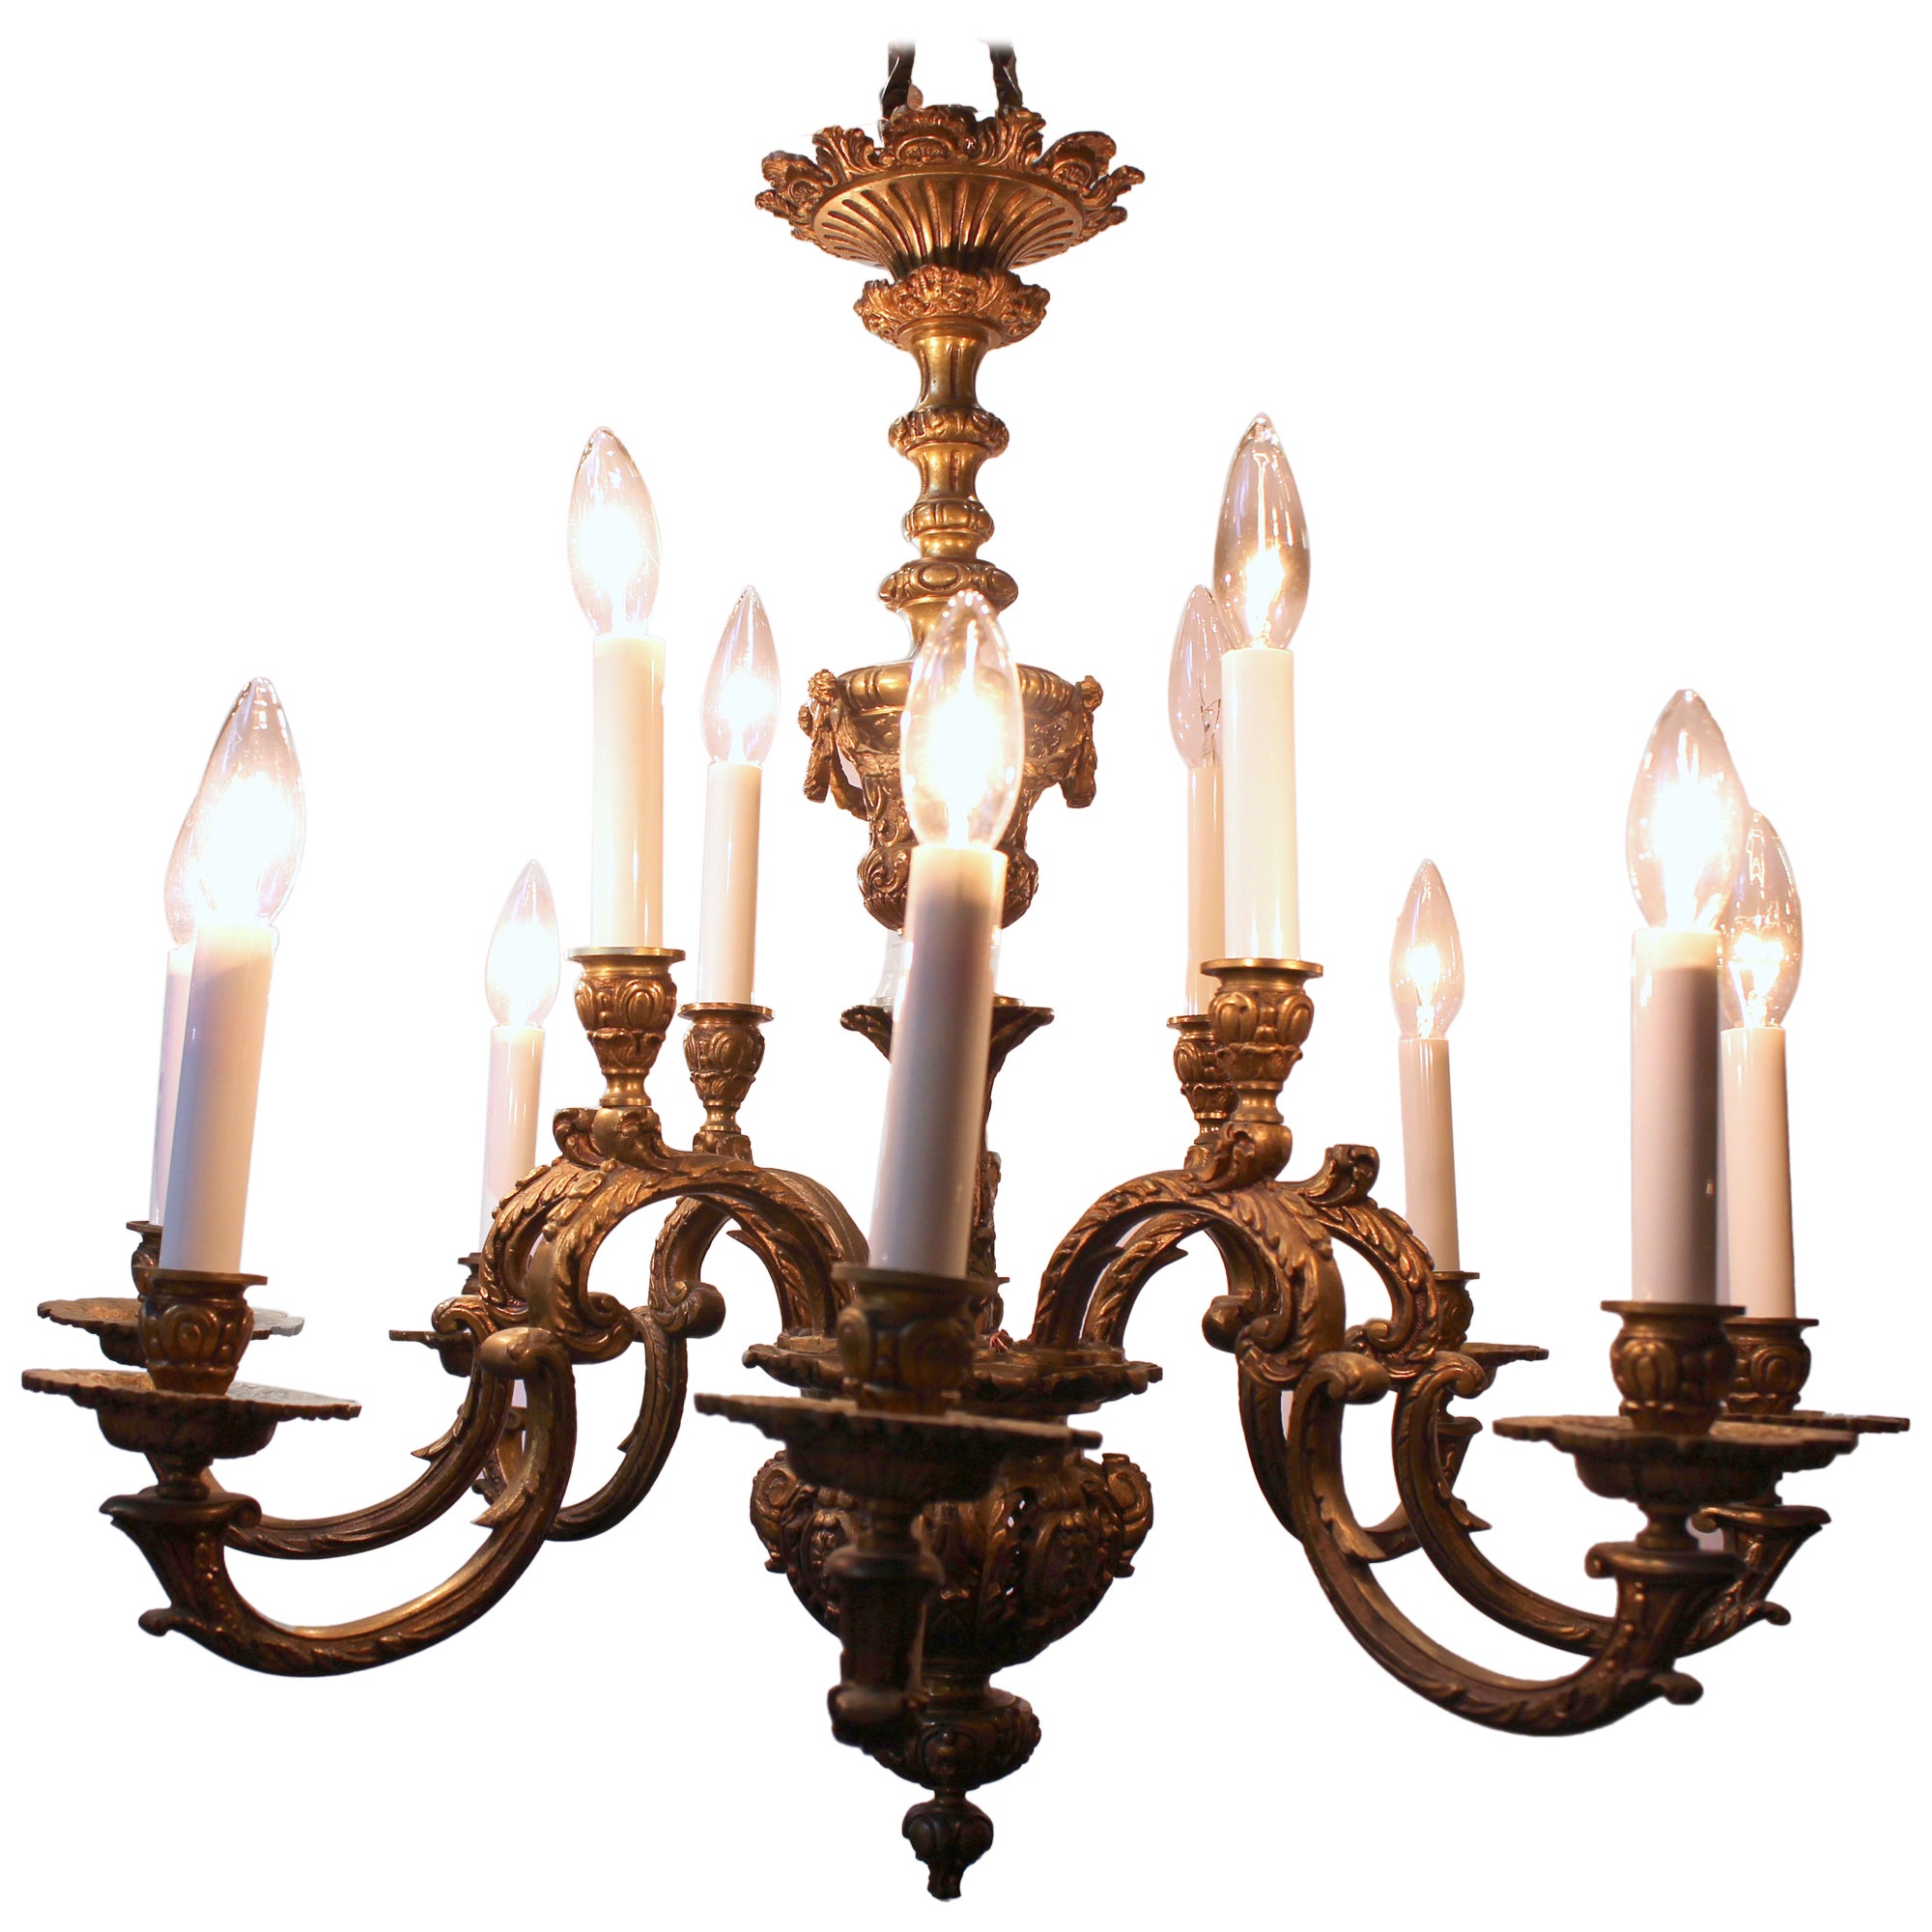 c. 1900 Louis XIV Style French Chandelier